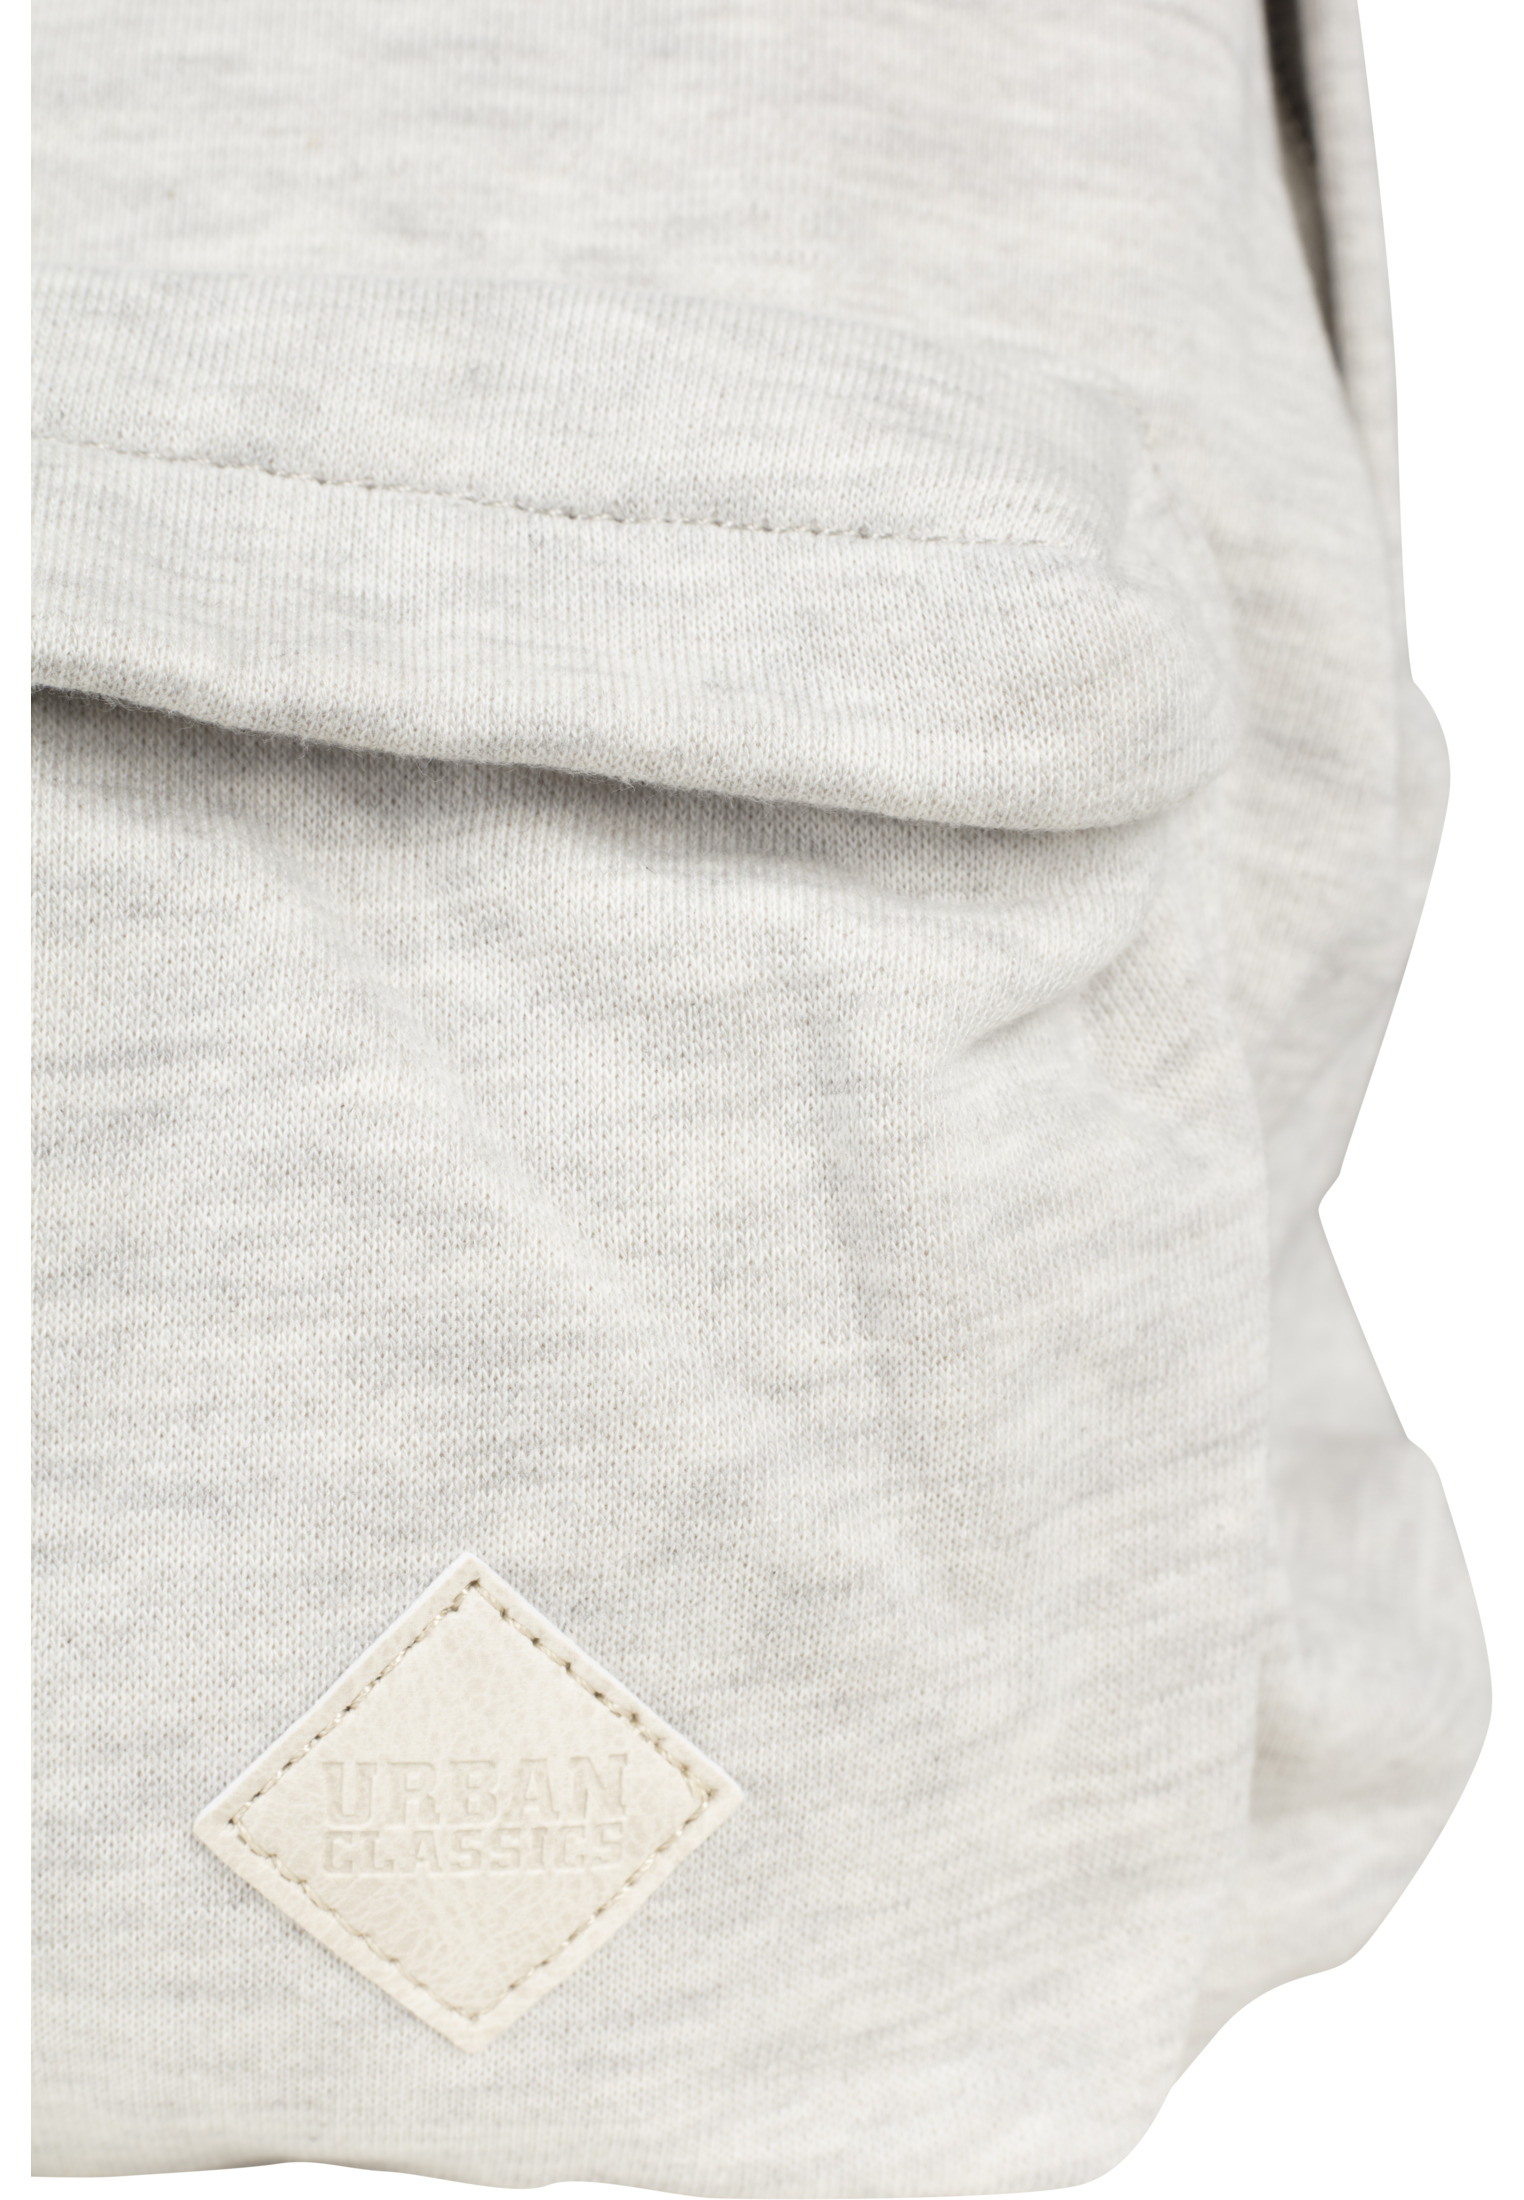 Taschen Sweat Backpack in Farbe offwhite melange/offwhite